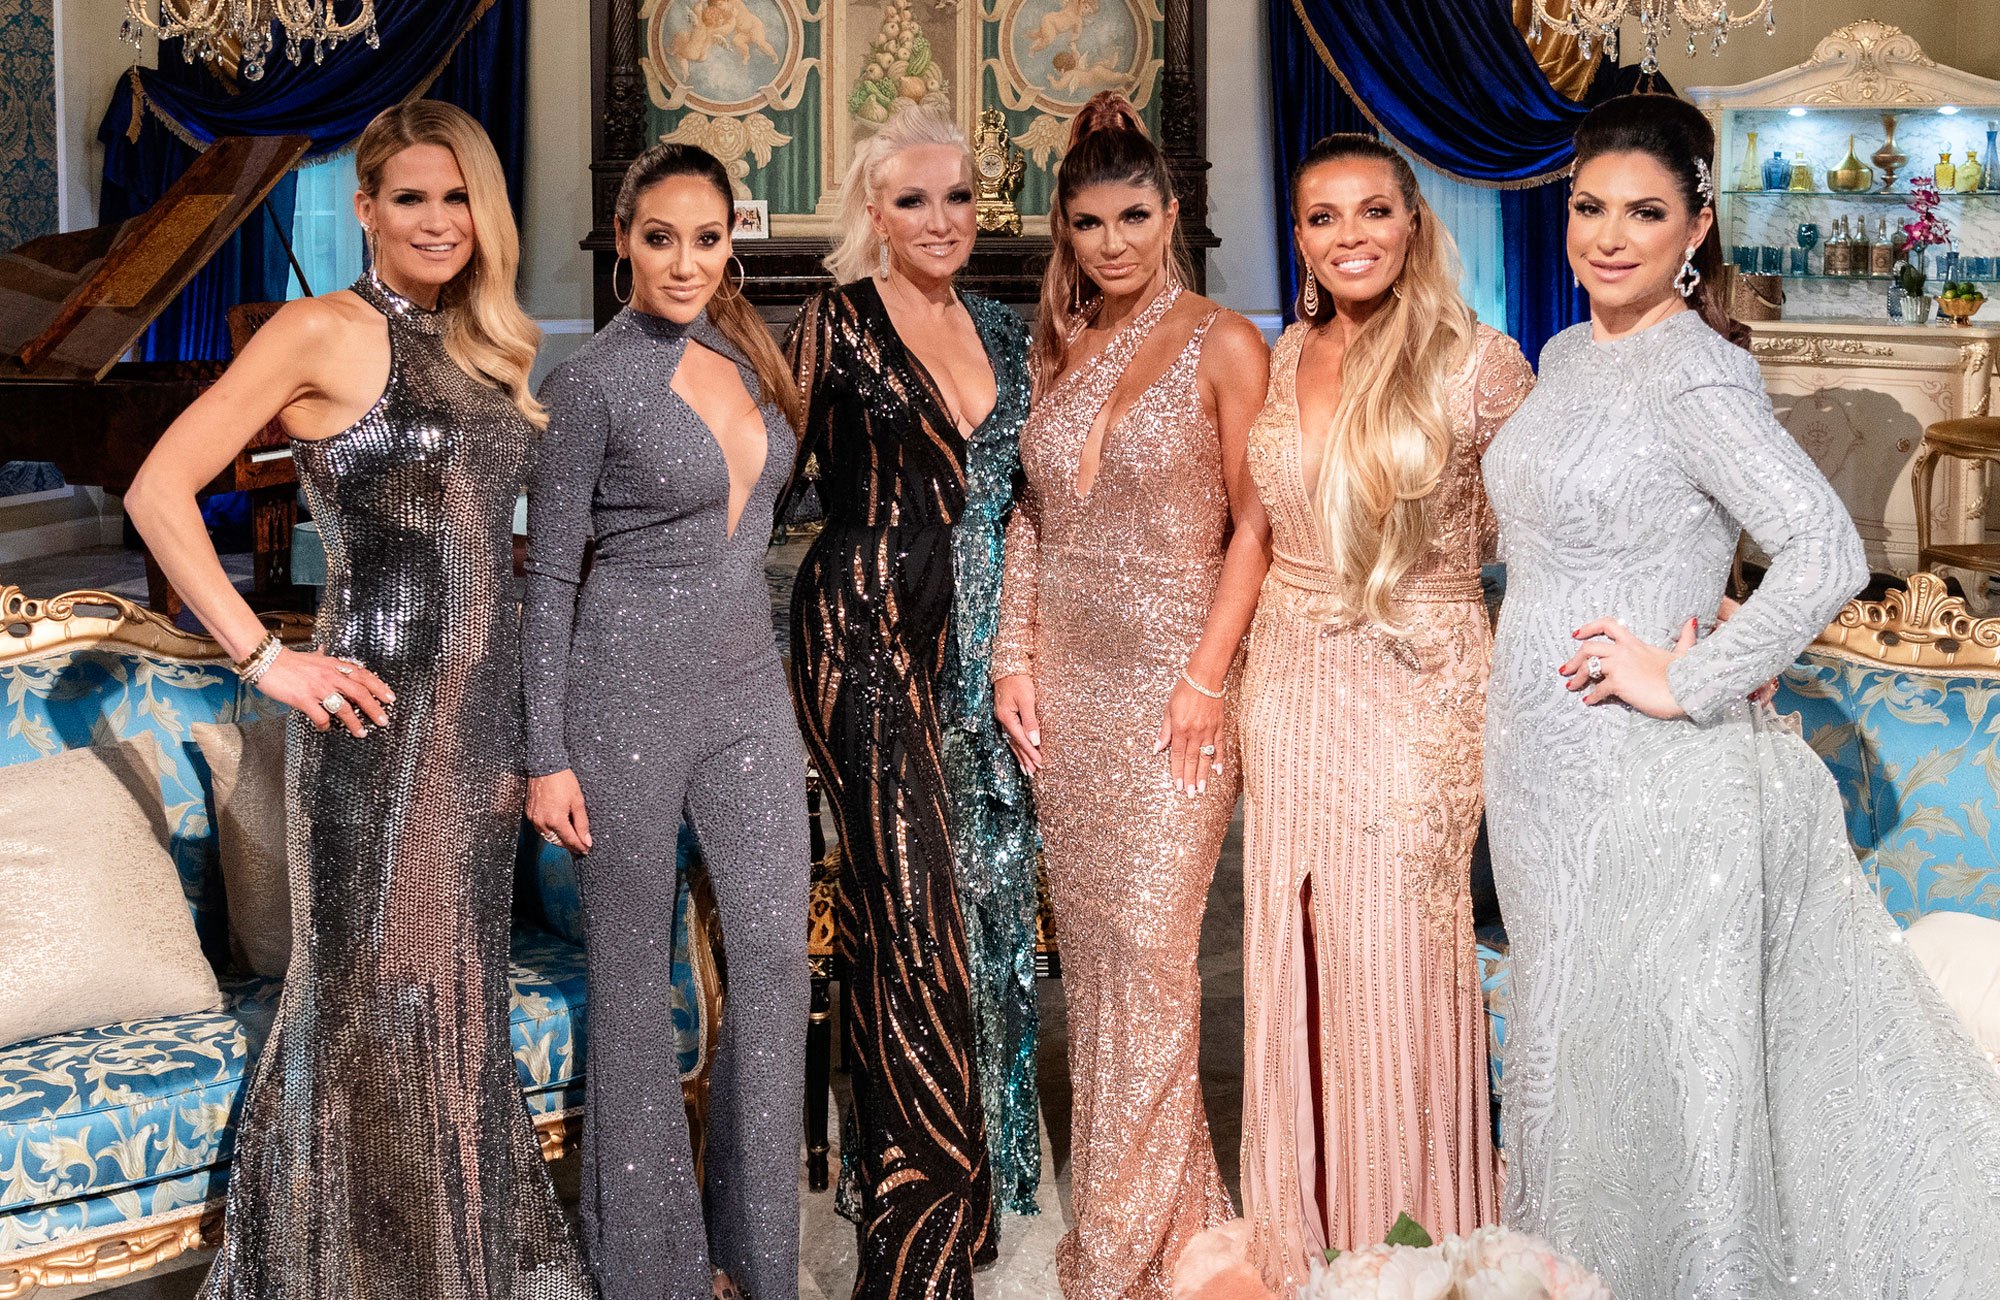 Real Housewives of New Jersey Season 12 Vacation Destination Revealed!